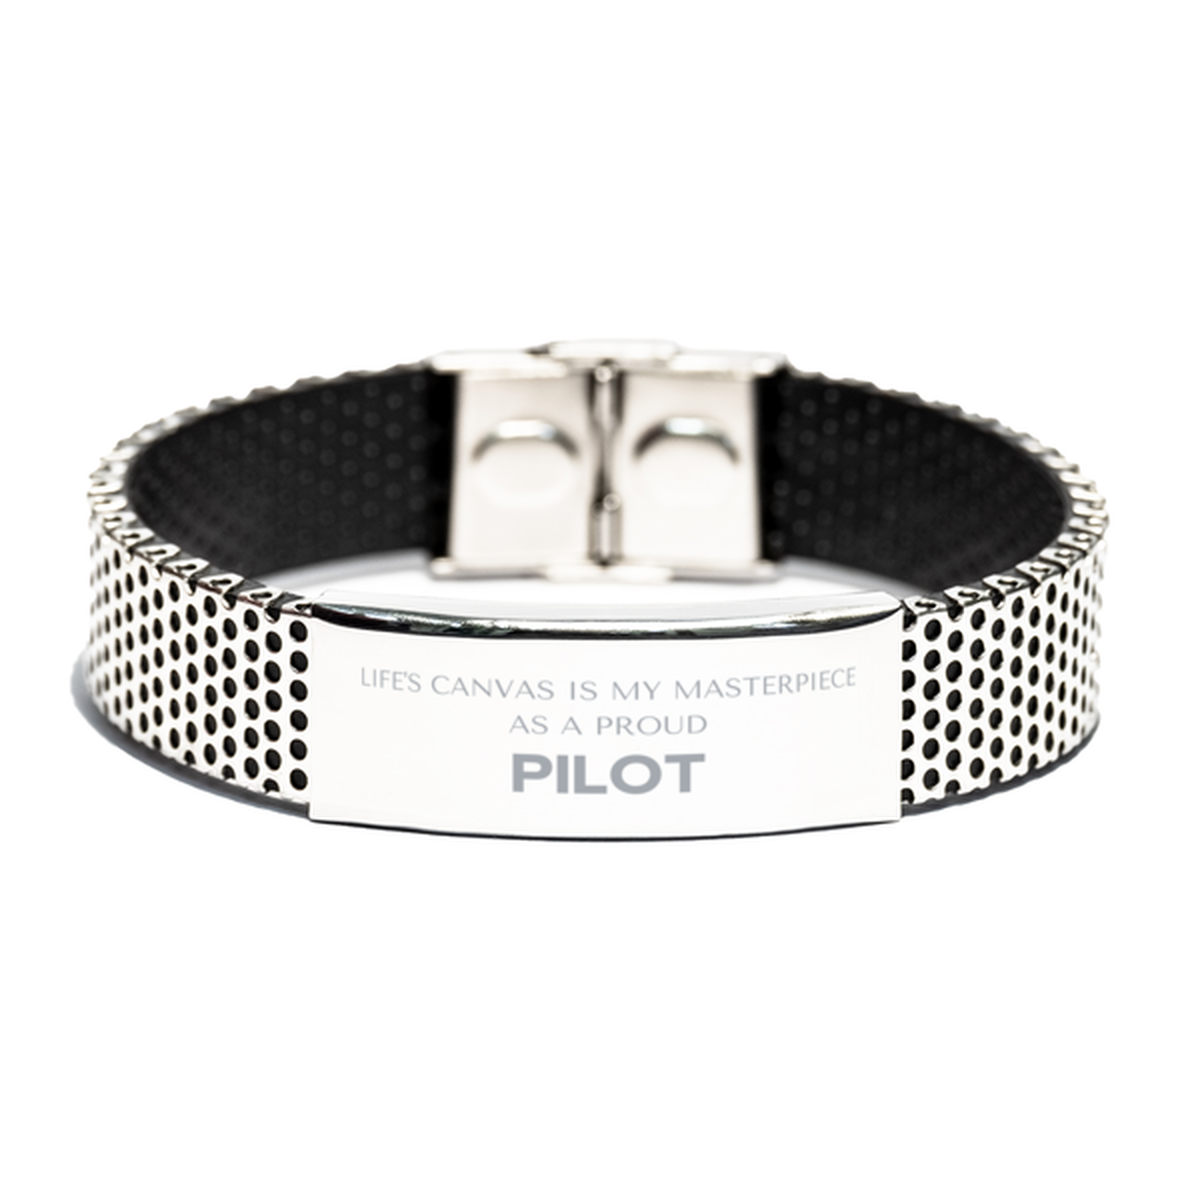 Proud Pilot Gifts, Life's canvas is my masterpiece, Epic Birthday Christmas Unique Stainless Steel Bracelet For Pilot, Coworkers, Men, Women, Friends